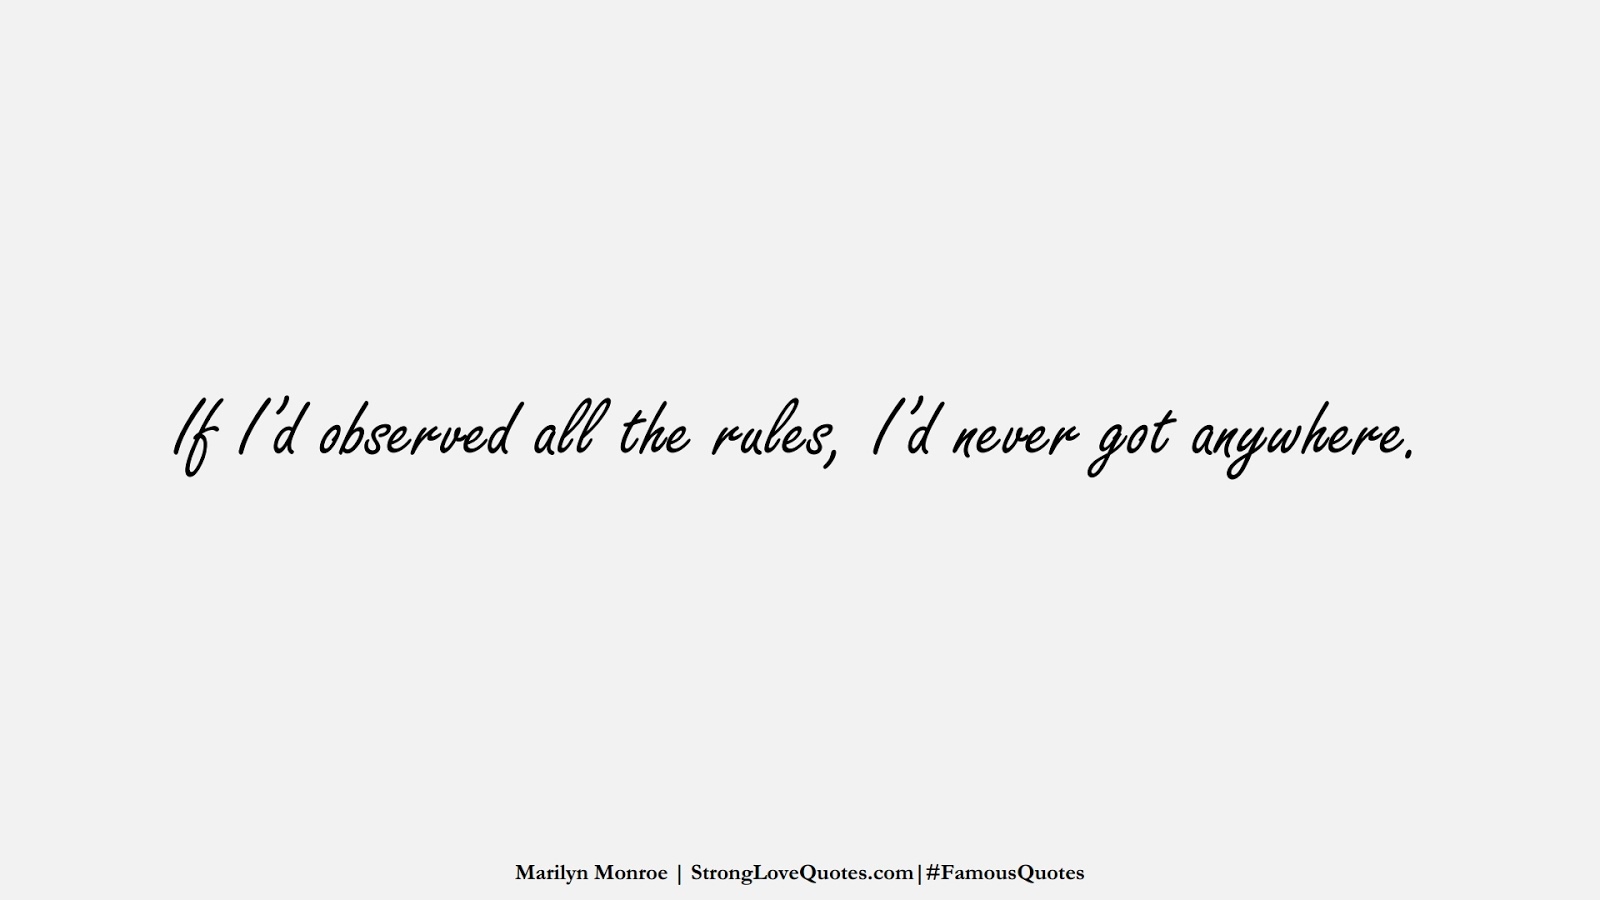 If I’d observed all the rules, I’d never got anywhere. (Marilyn Monroe);  #FamousQuotes